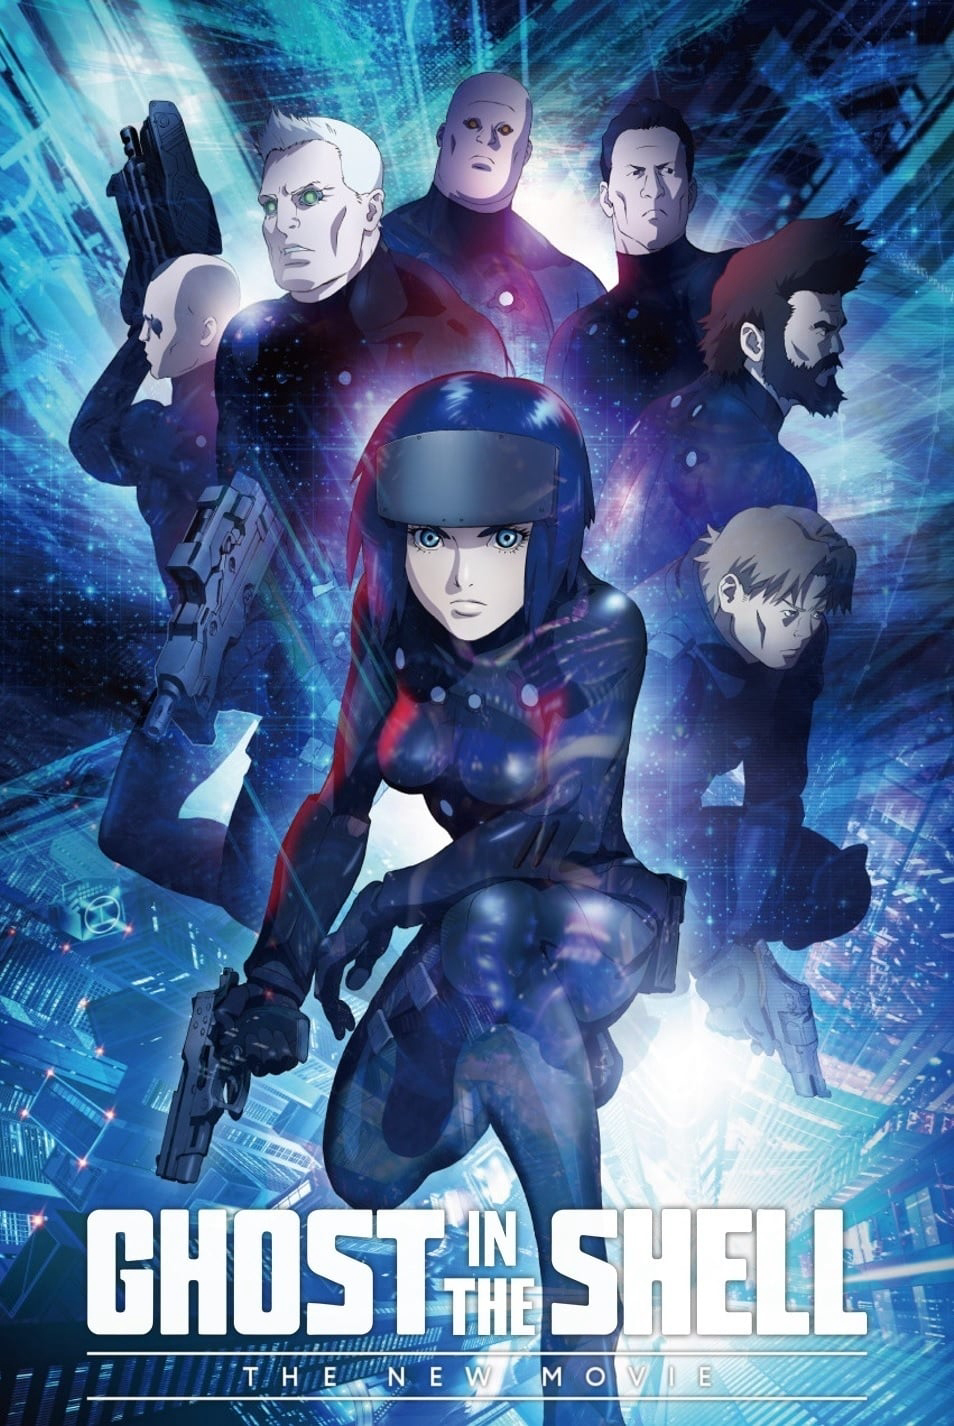 Poster Phim Linh Hồn Của Máy- Phần Mới (Ghost in the Shell: The New Movie)